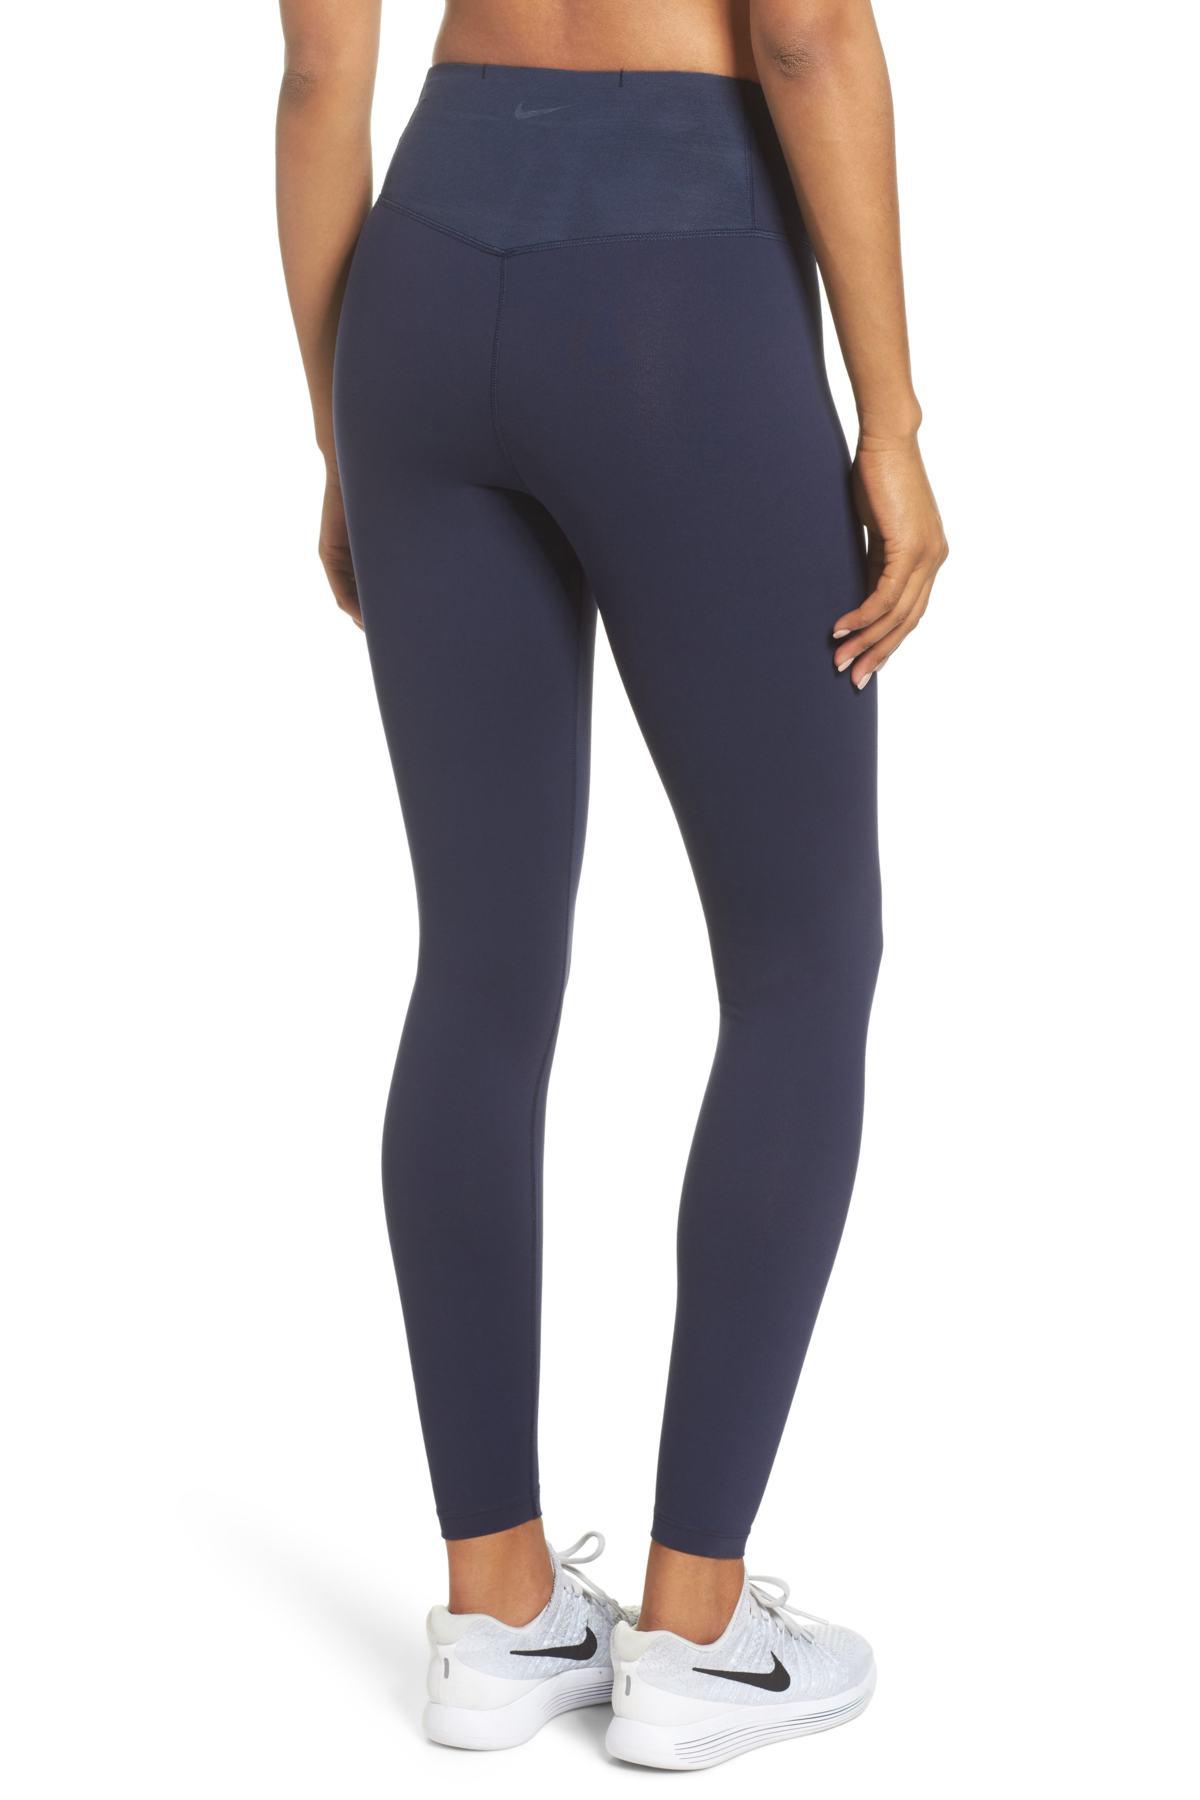 Nike Sculpt Lux Training Tights in Blue 